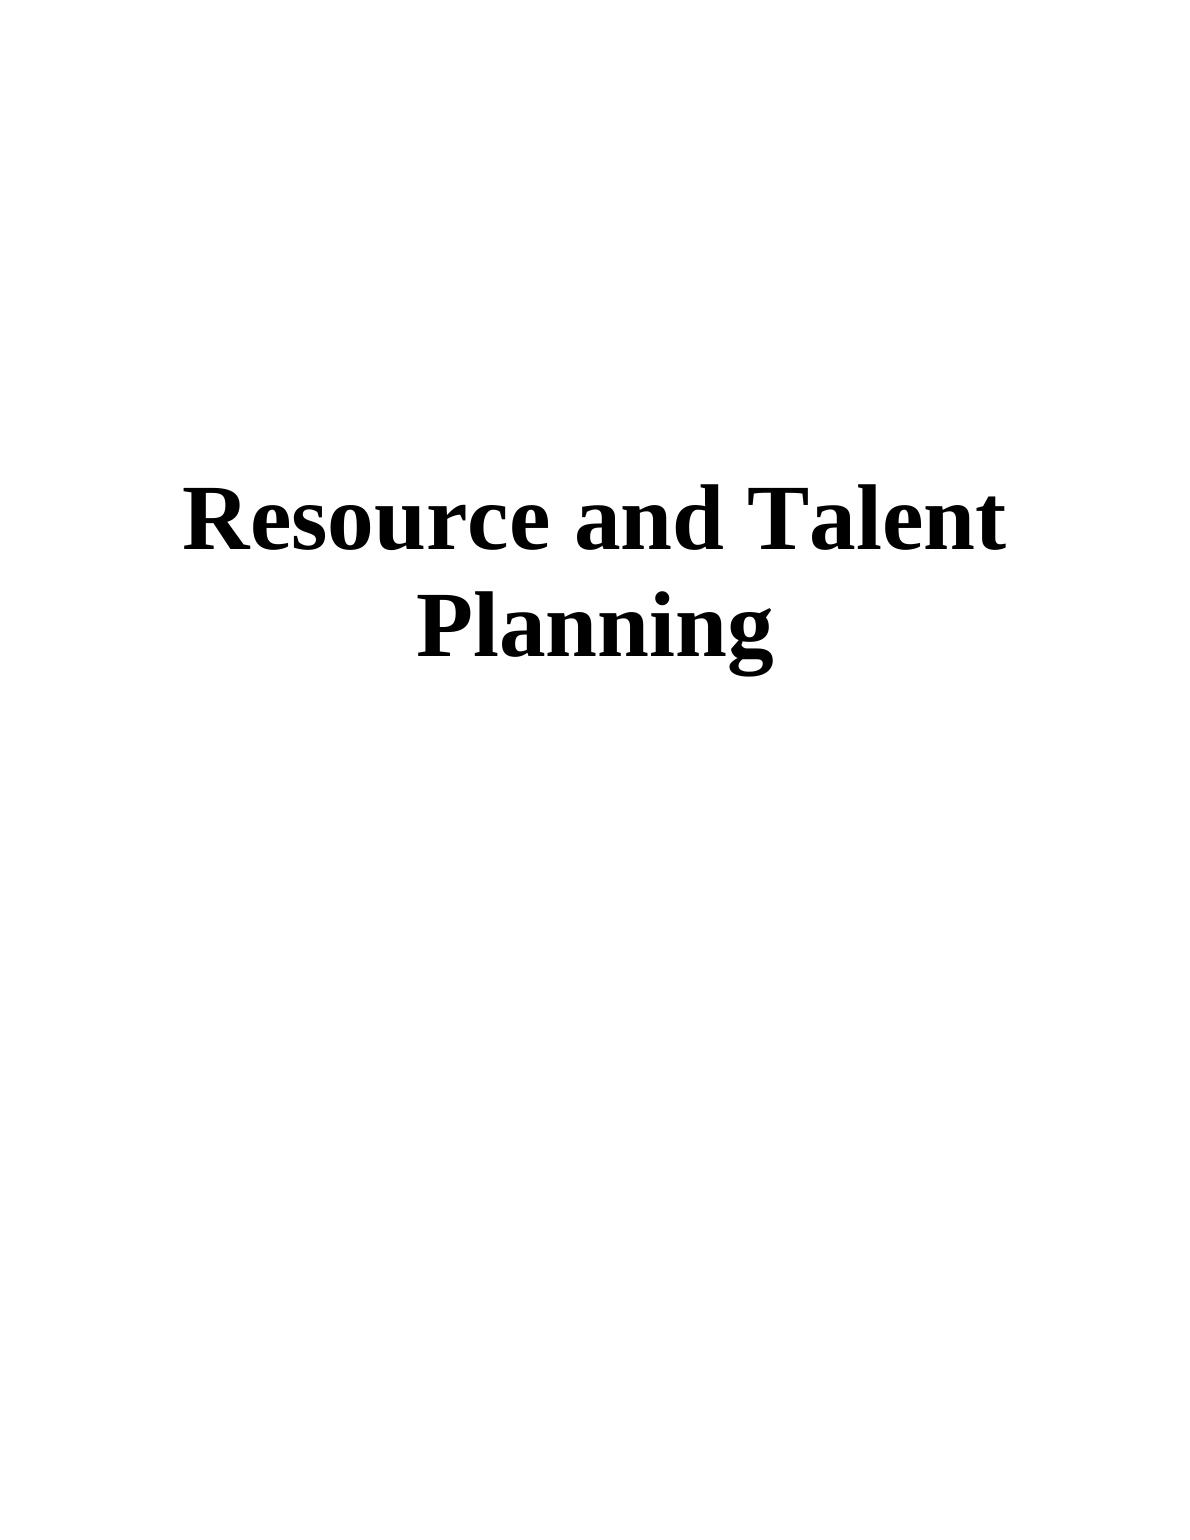 Resource and Talent Planning_1